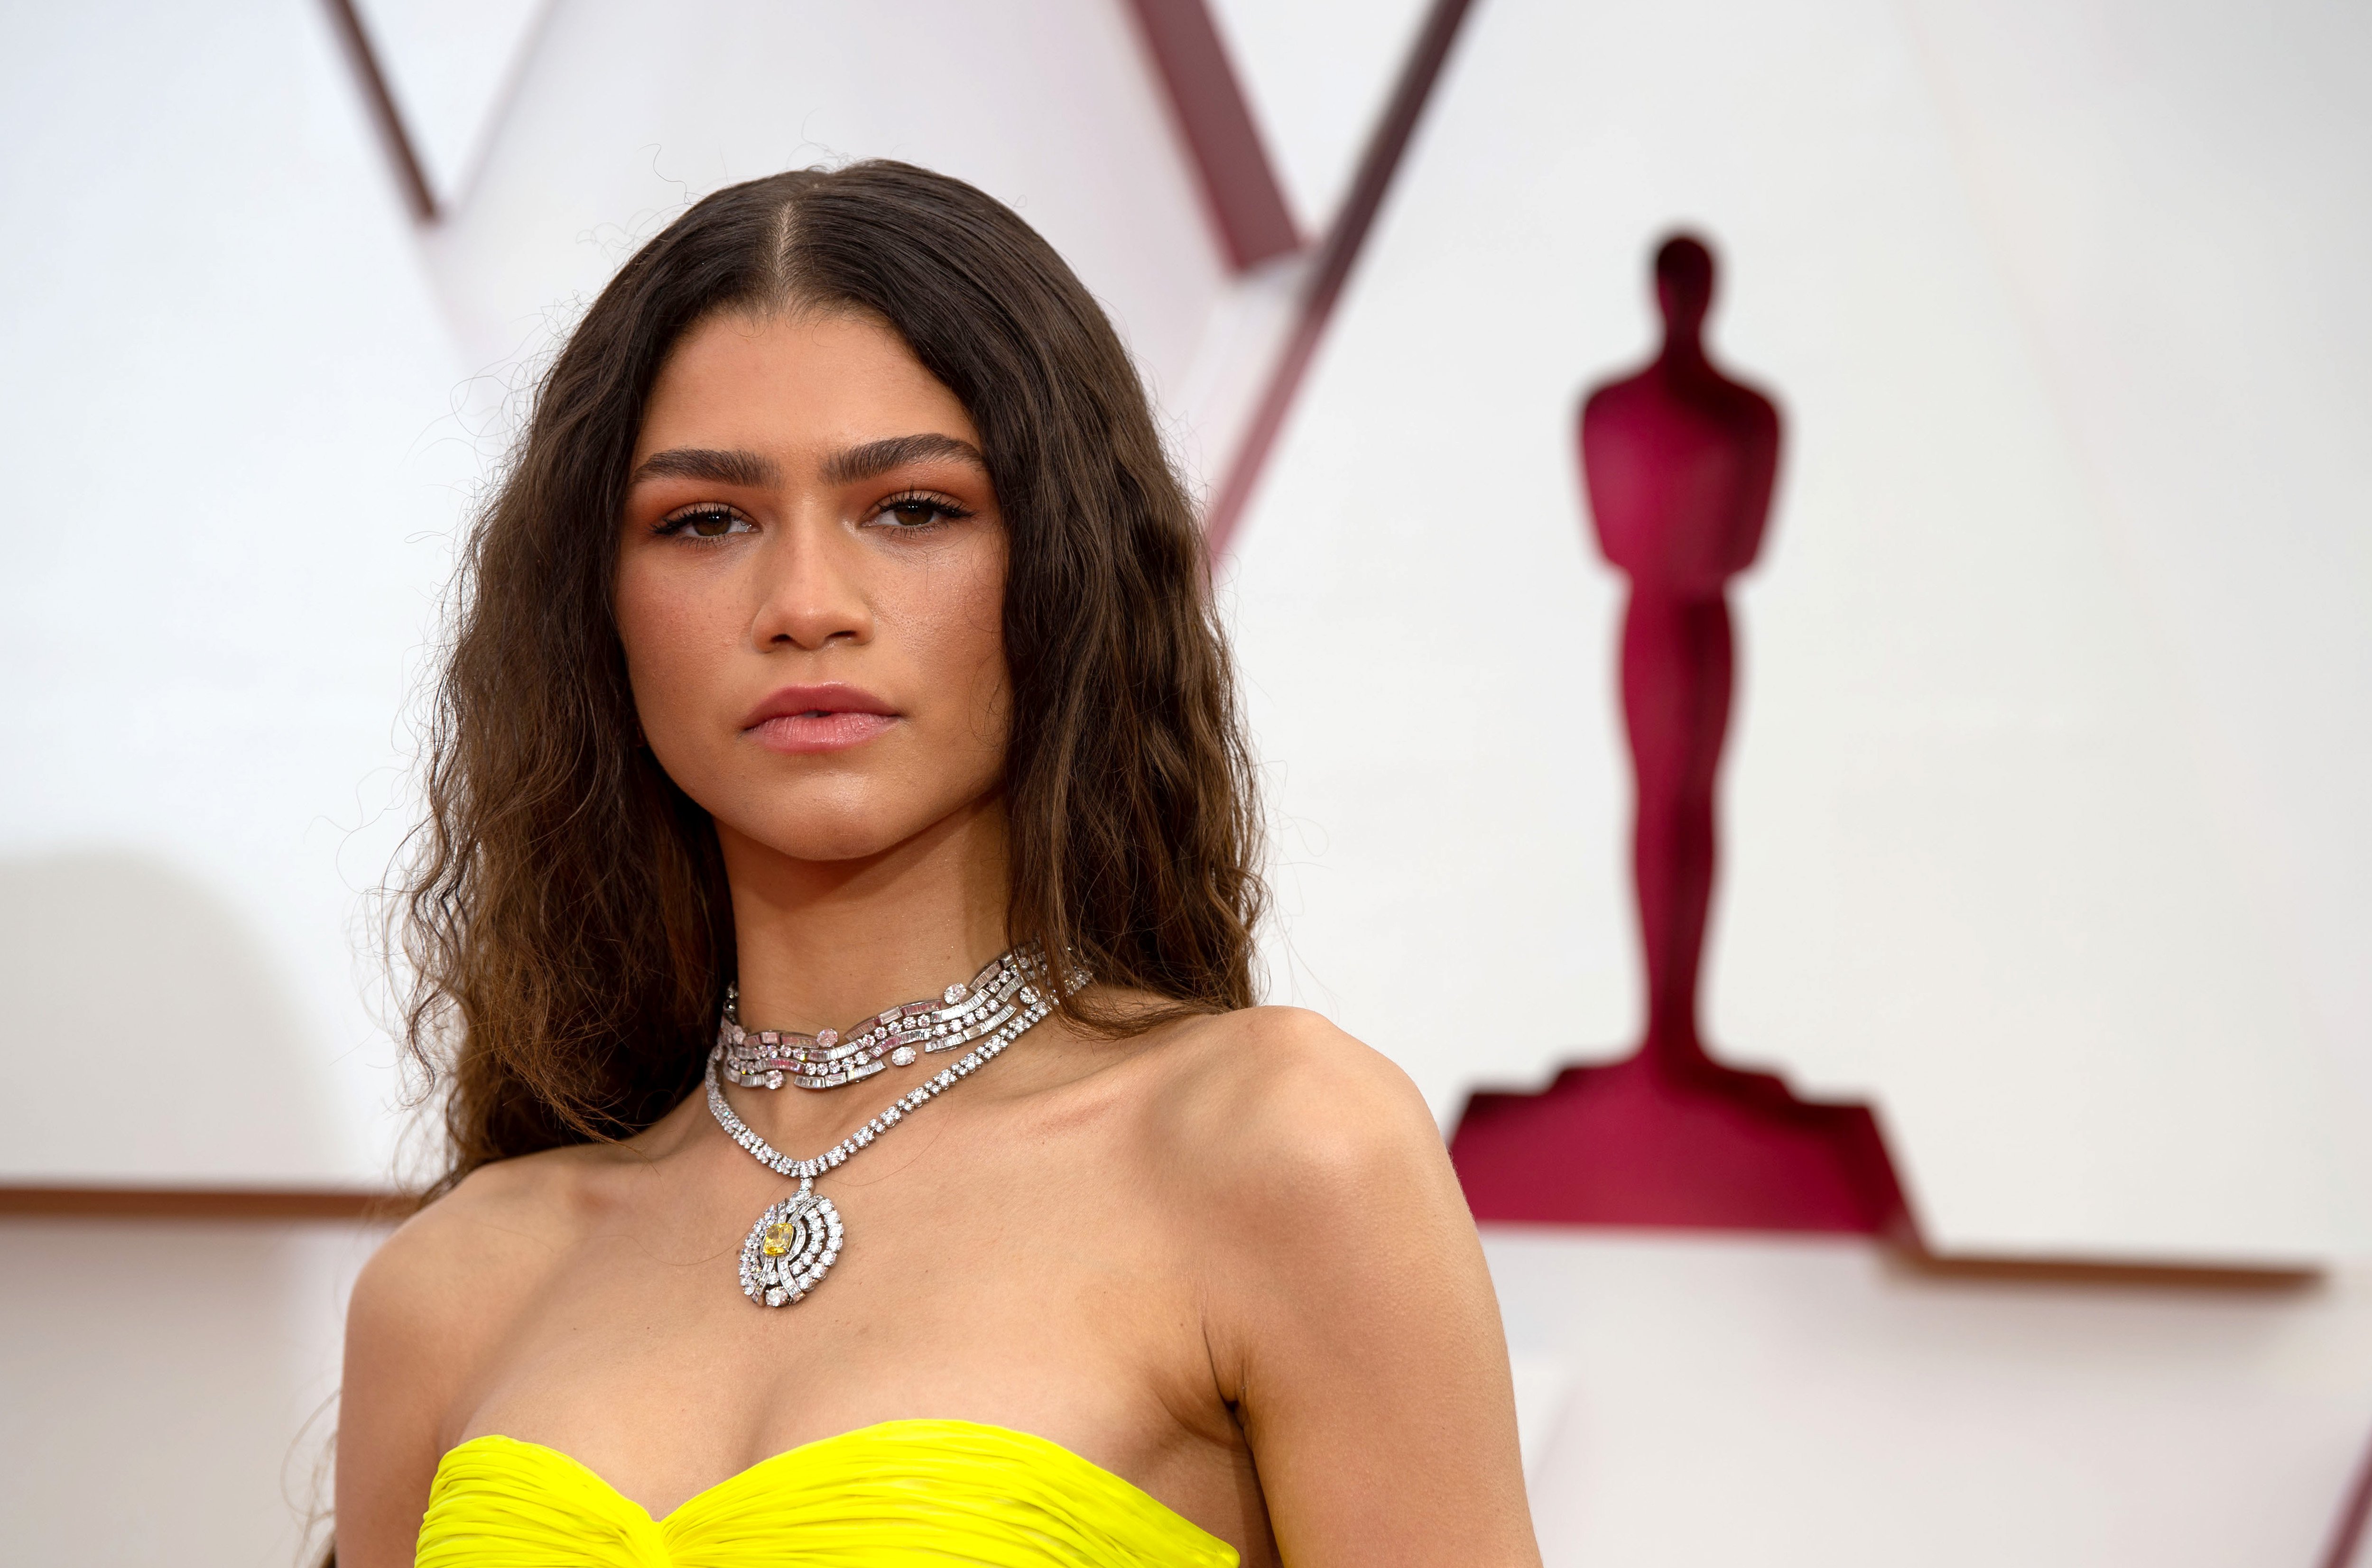 A photo of Zendaya wearing a yellow Valentino gown and a diamond necklace at the Oscars 2021.